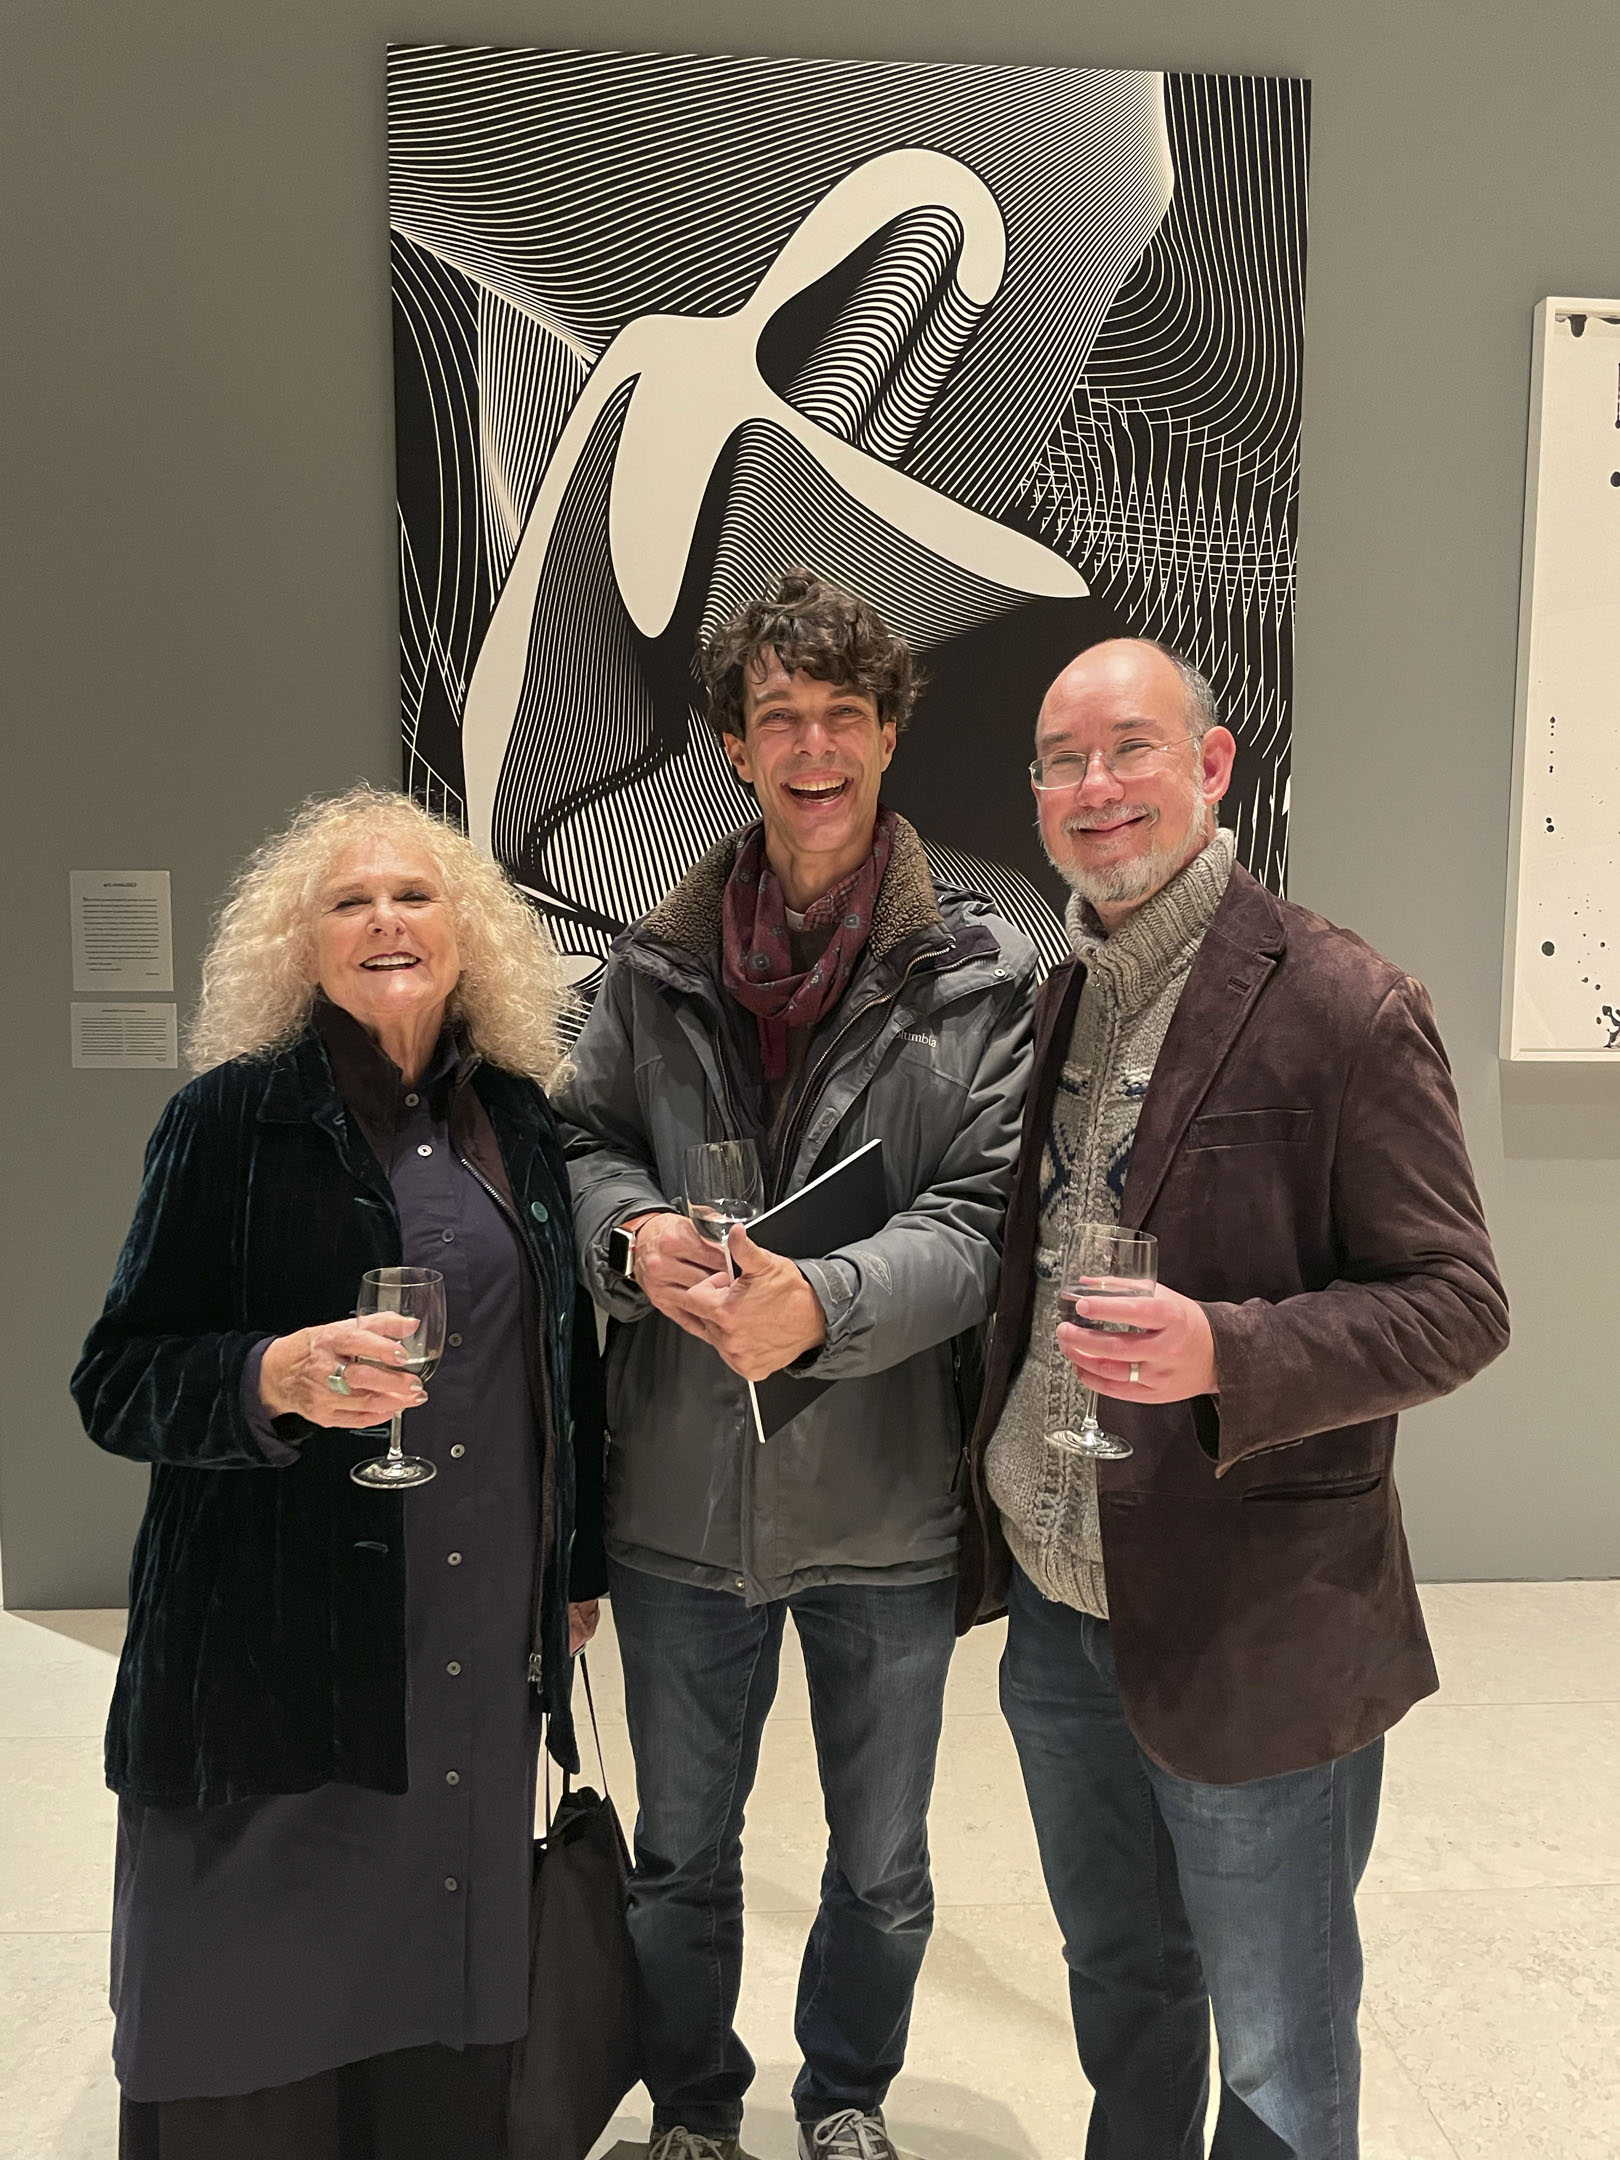 ART NOW 2023 - Opening reception at Hearst Tower, NYC. November 15, 2022.